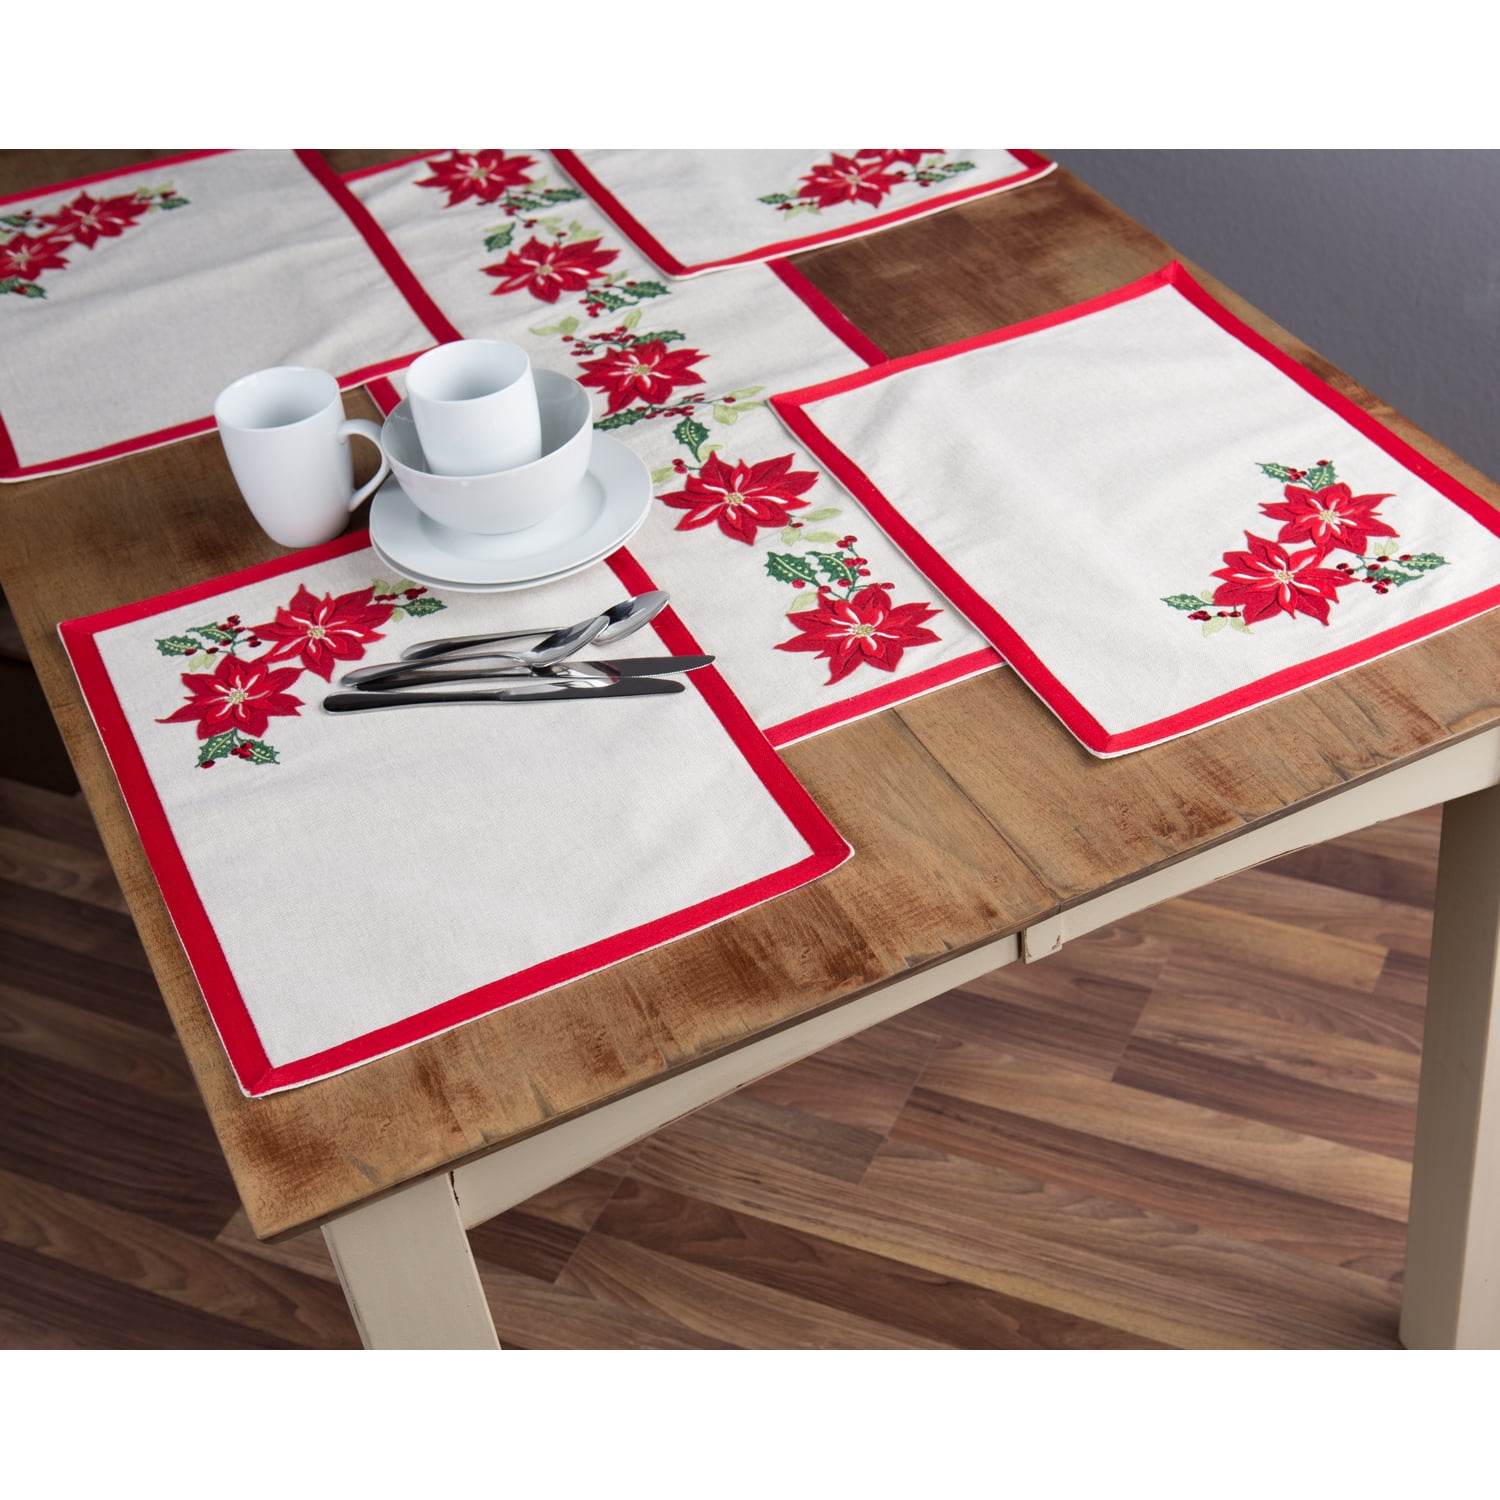 NEW Holiday Time Poinsettia Table Runner 14/" x 72/"